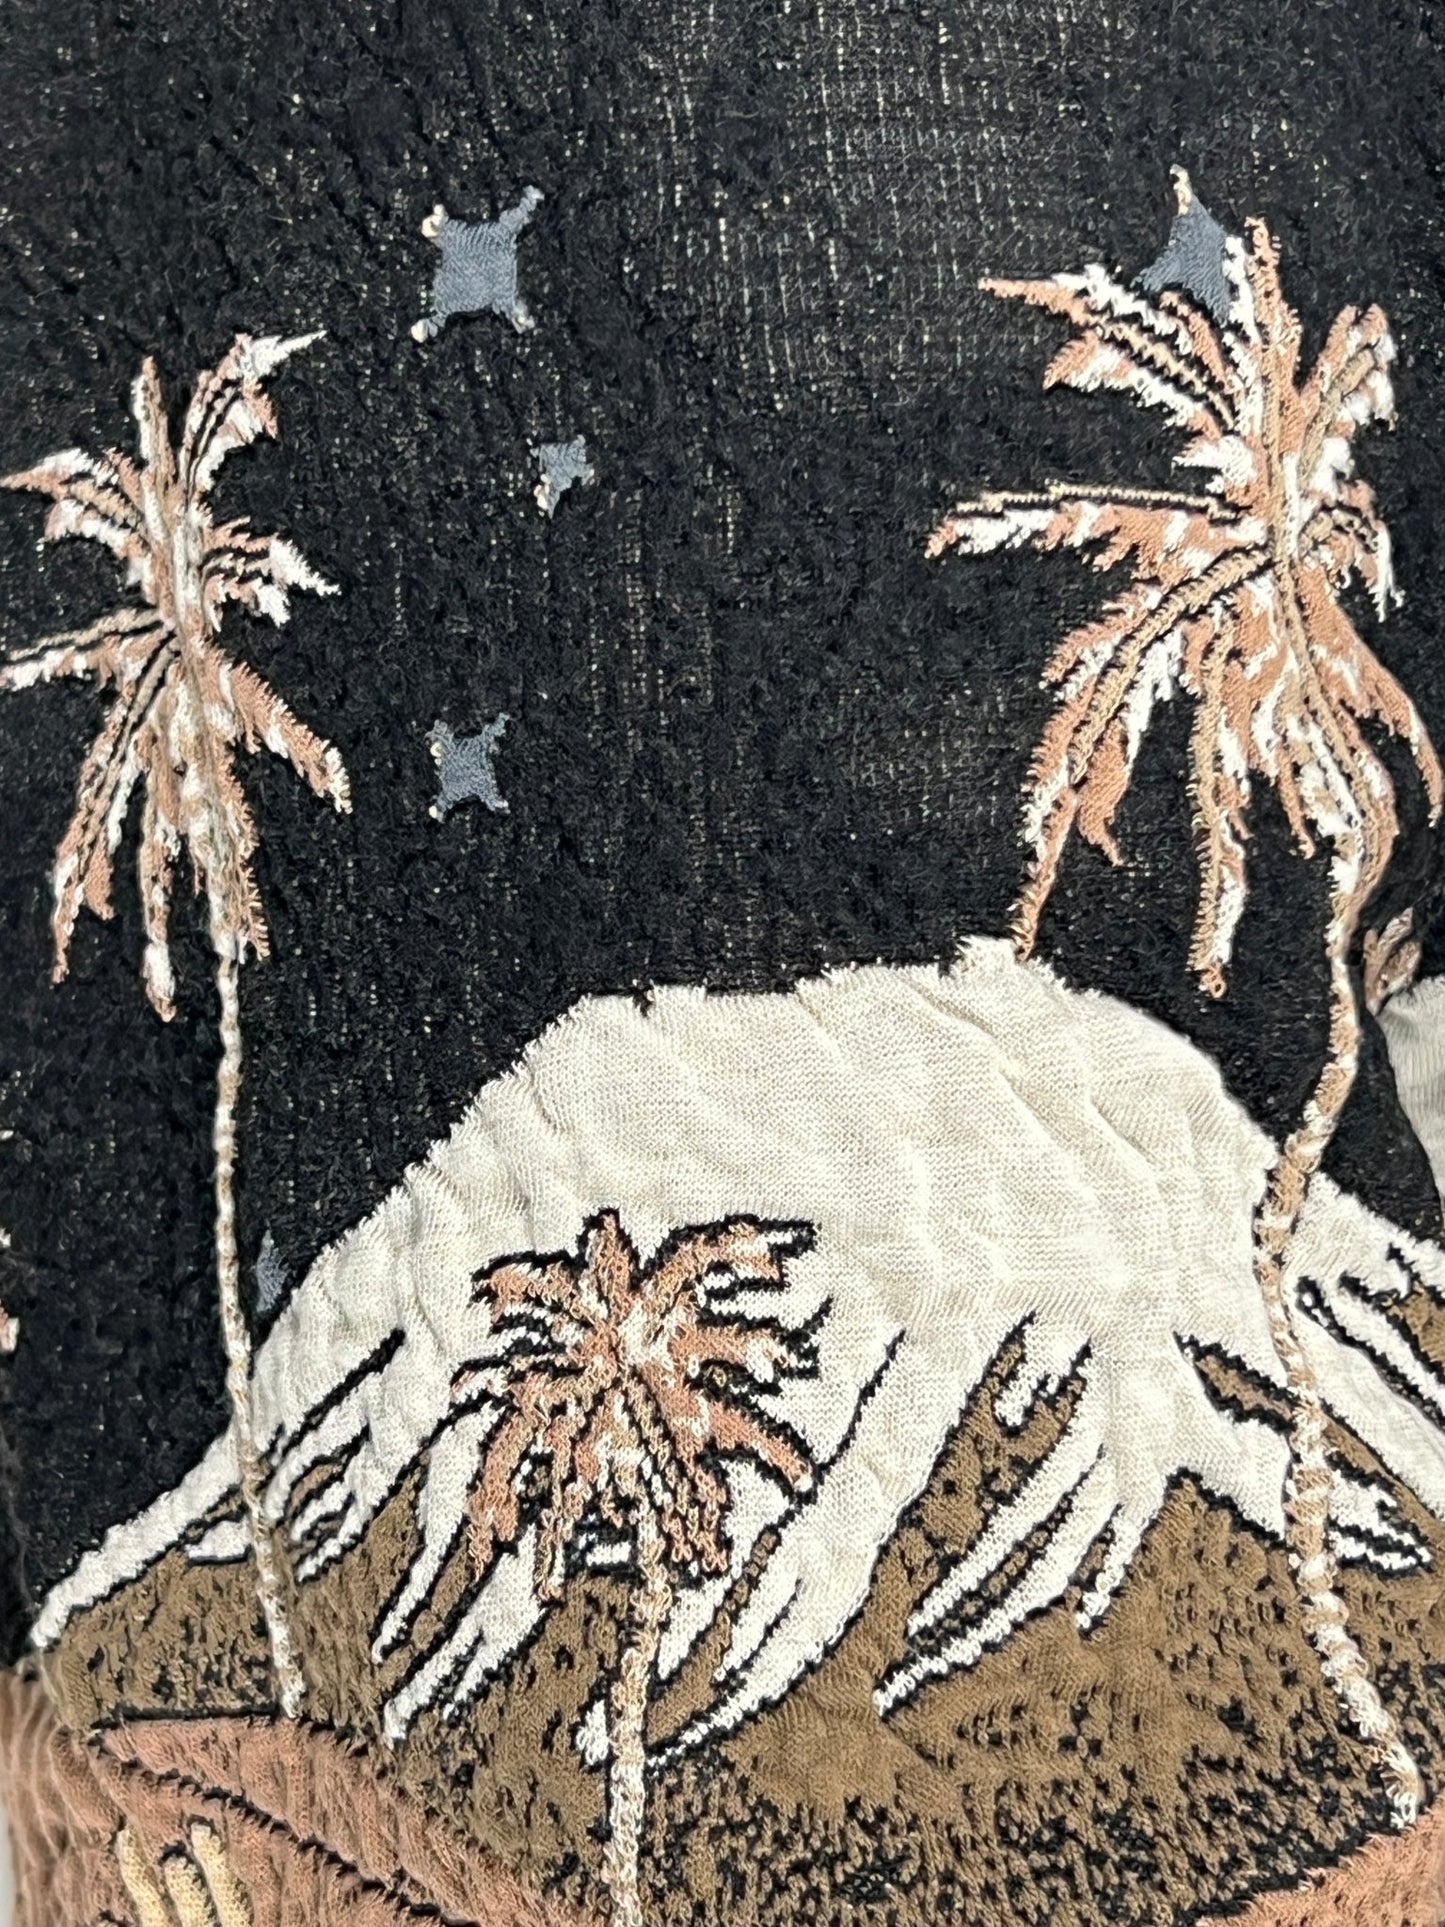 Close-up of a fabric with an embroidered design featuring palm trees, stars, and a large crab on a pair of ONLY THE BLIND OTB-BS1328 SEPIA MOUNTAIN JACQUARD SHORTS BLK.